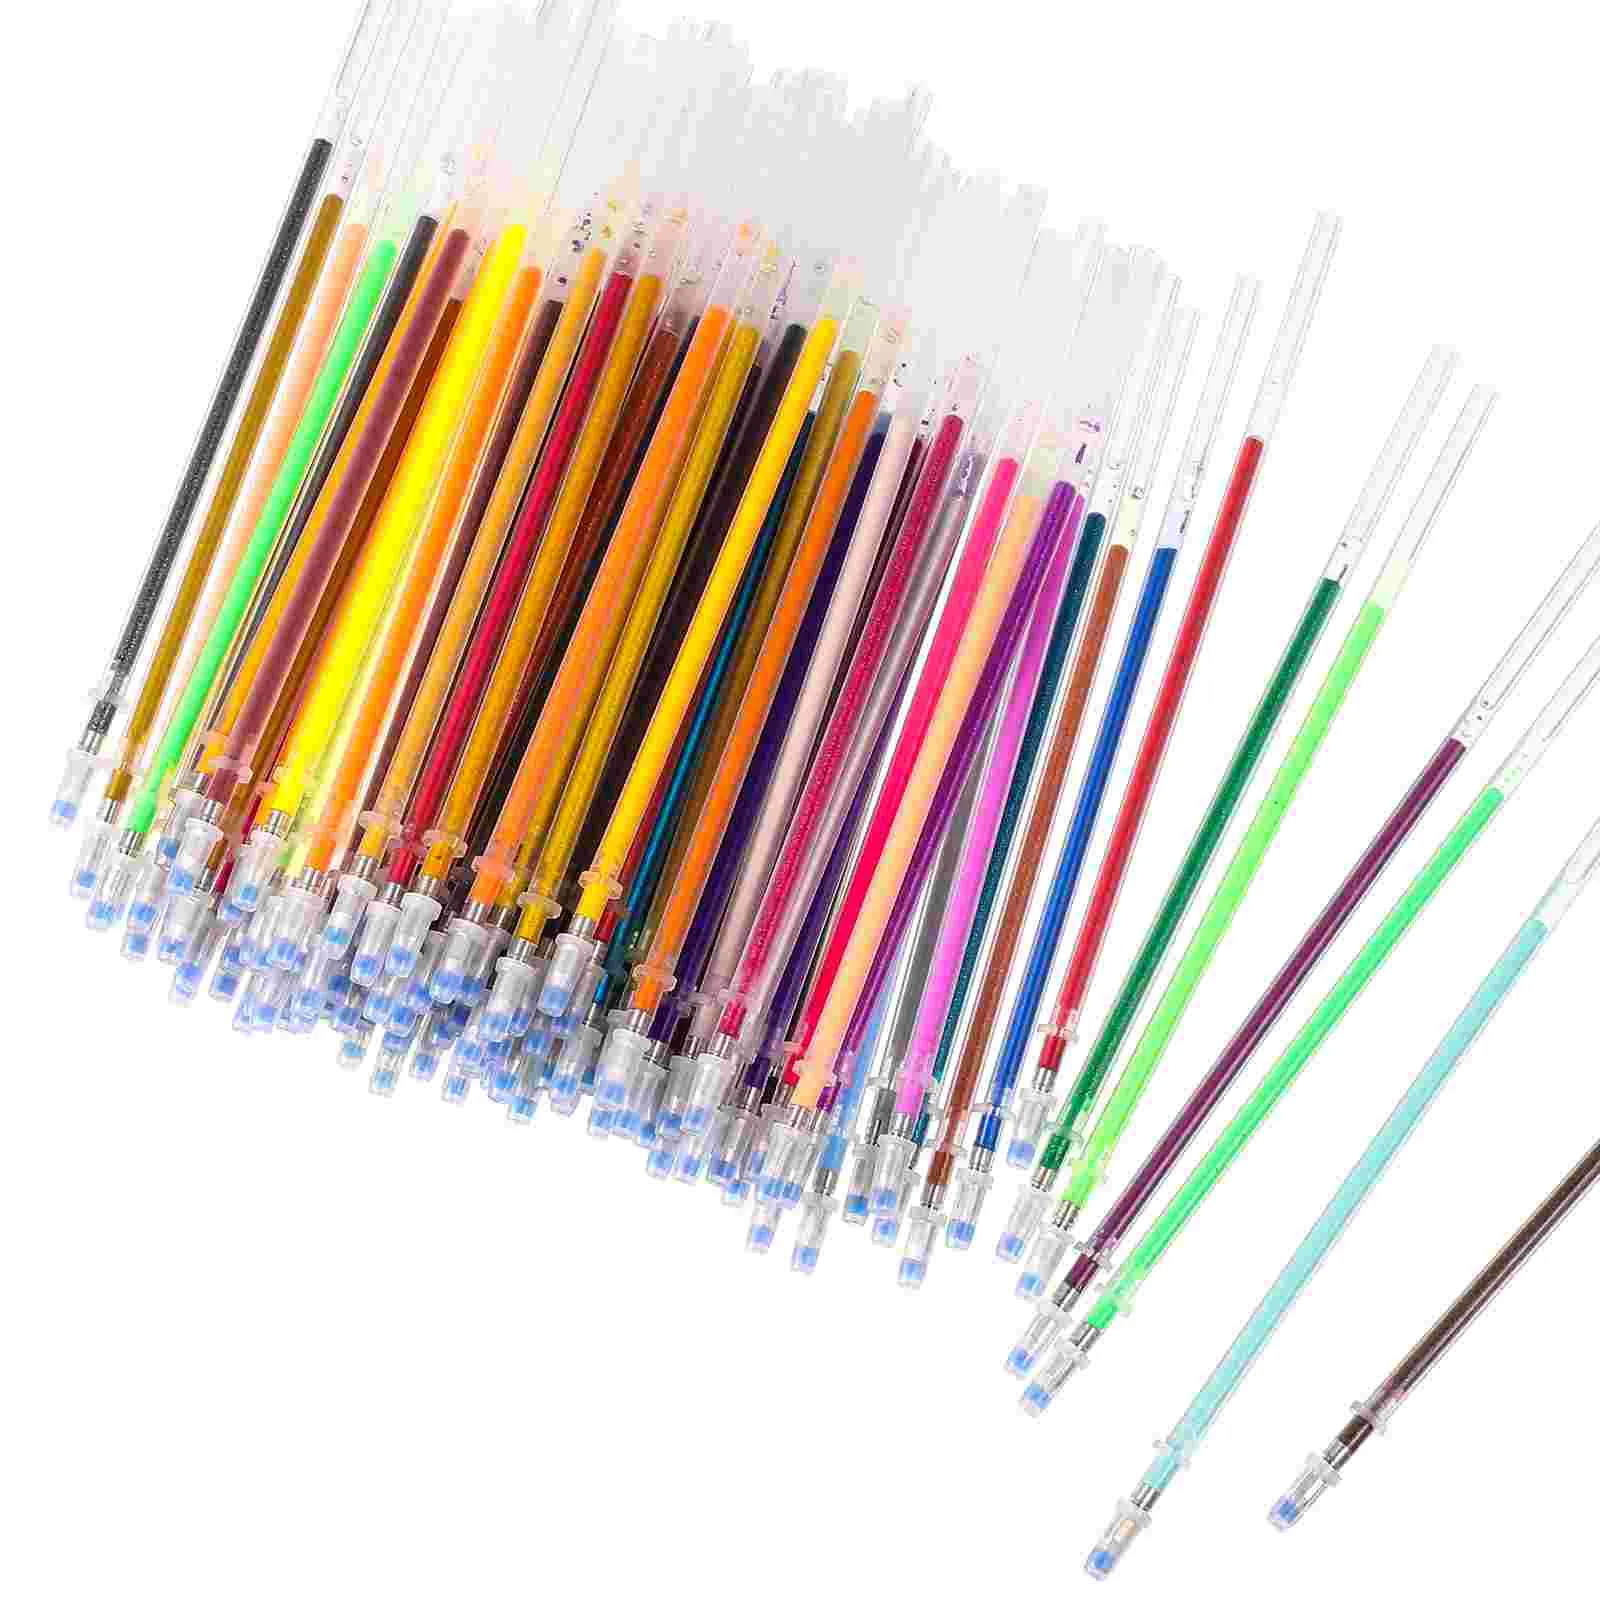 

Refill Replacements Pens Colorful Neutral Refills Colored Gel Drawing Doodling Ink Bullet Tip